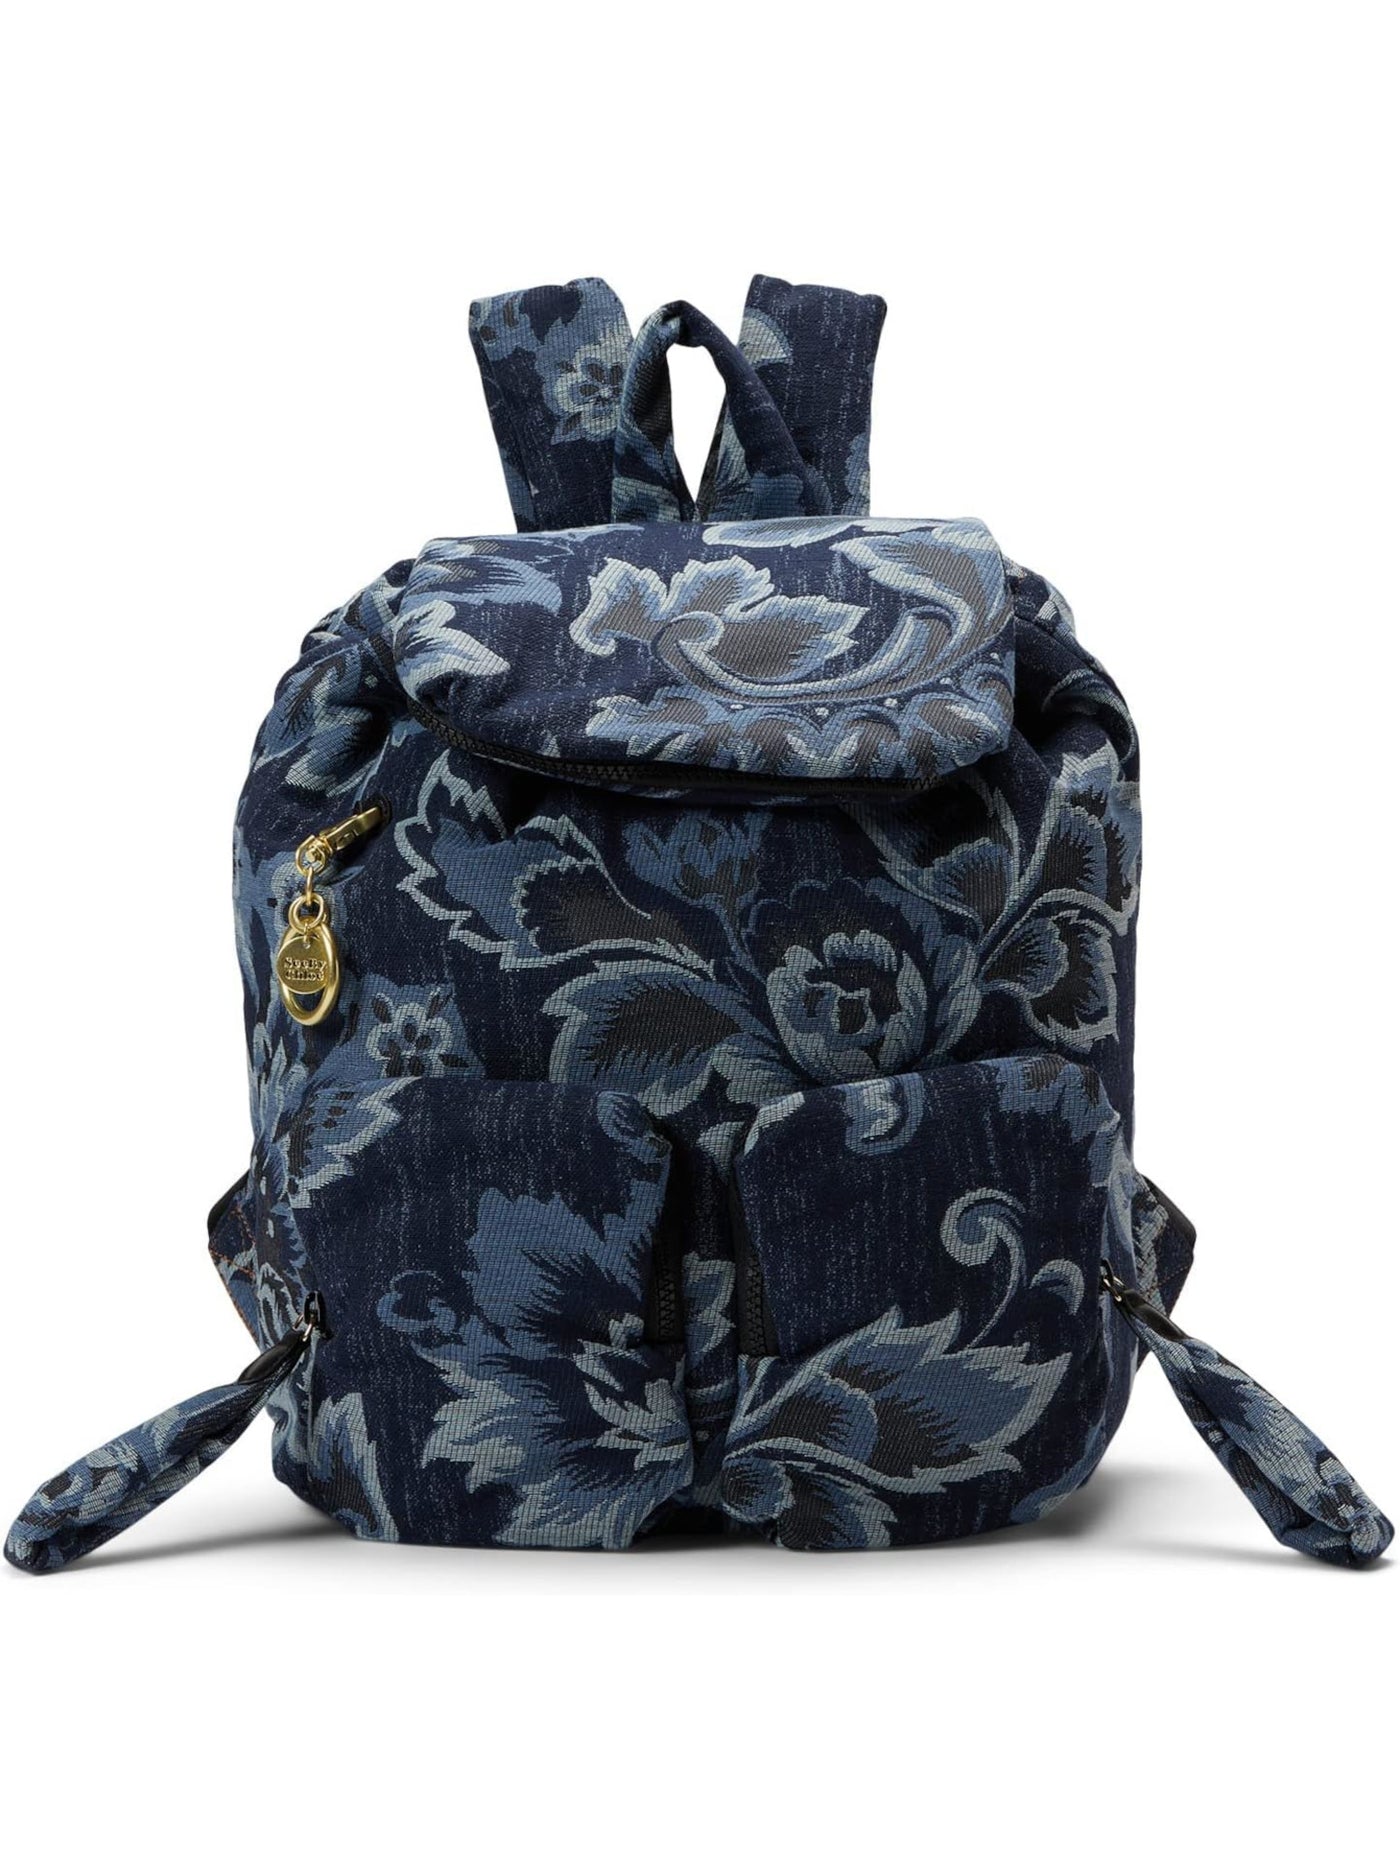 SEE BY CHLOE Women's Blue Floral Single Strap Backpack